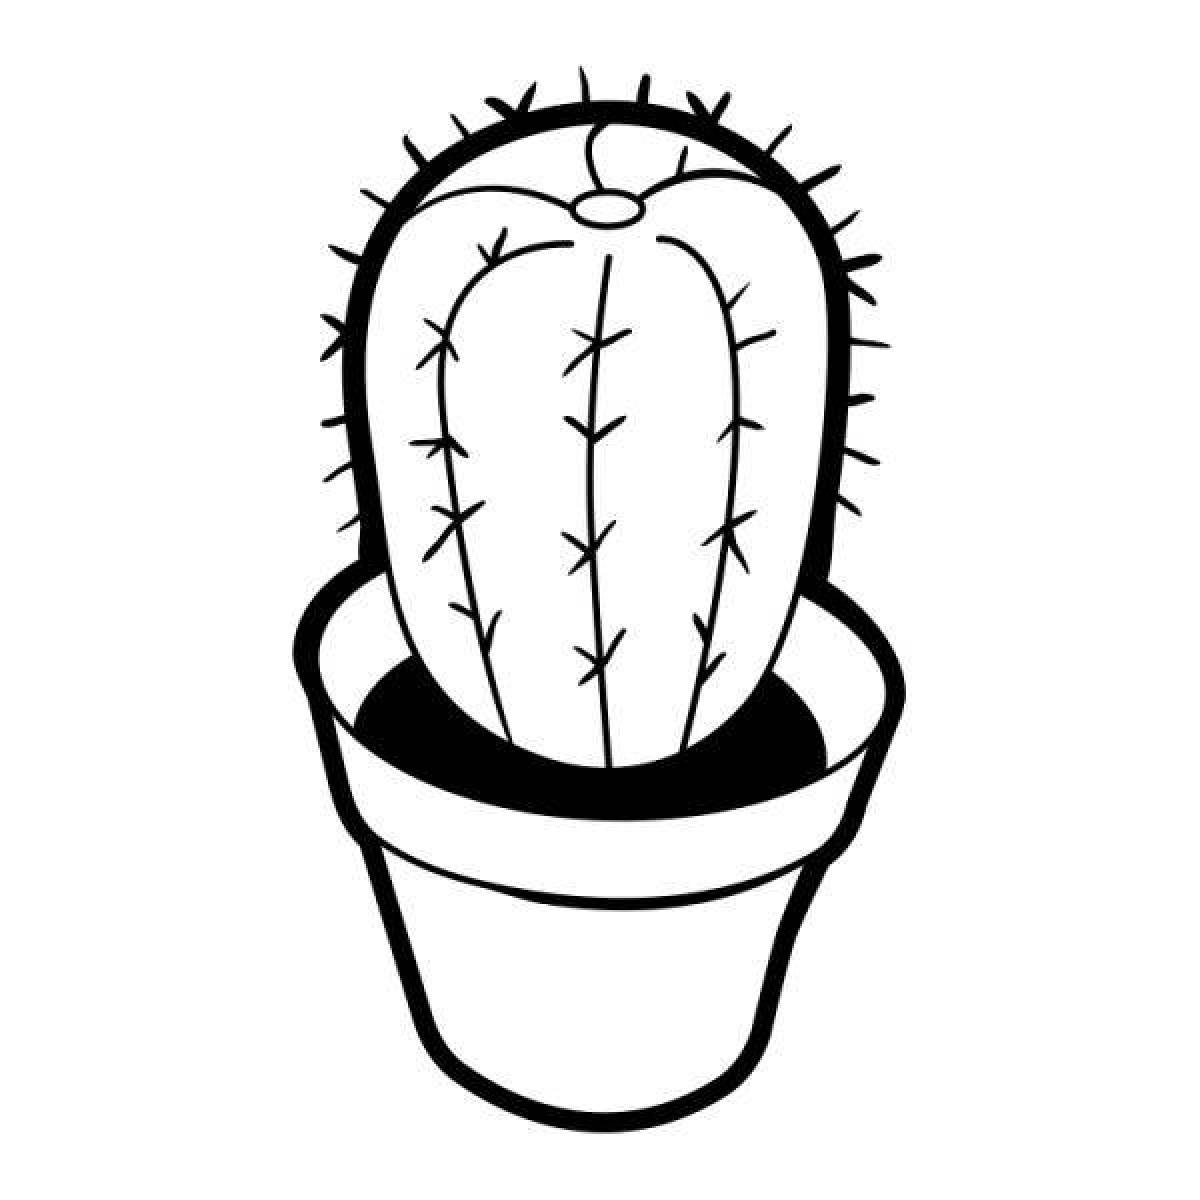 Playful cactus coloring page for kids